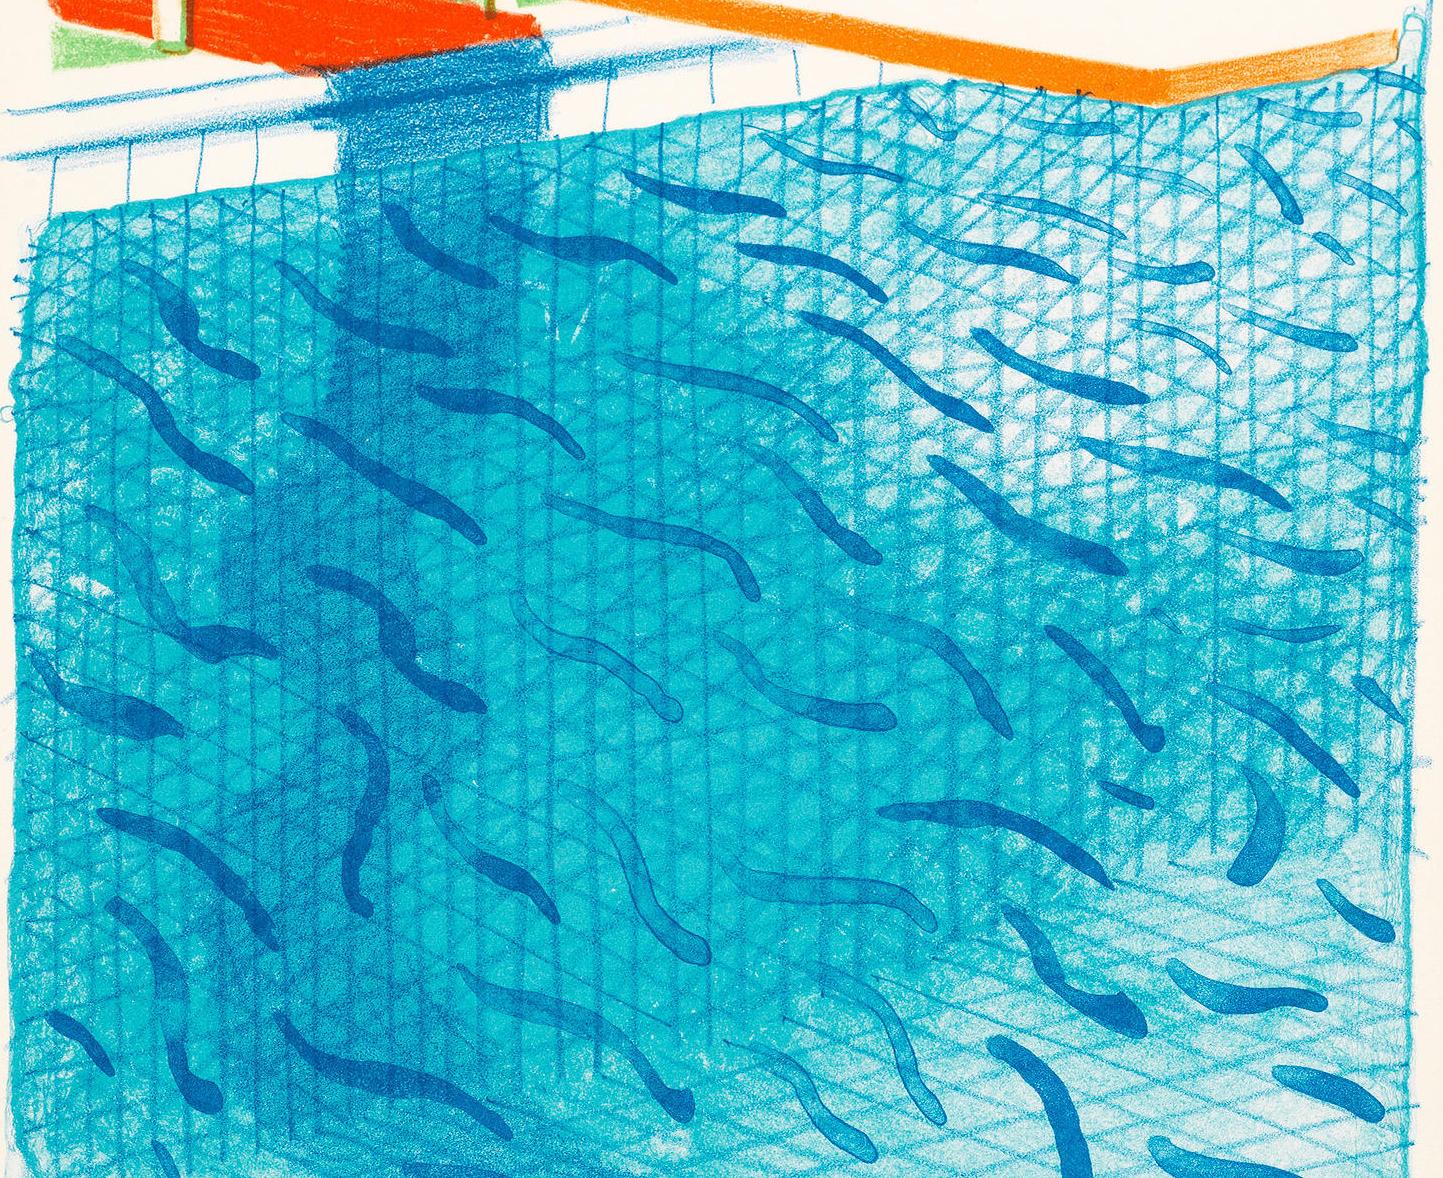 David Hockney Figurative Art - Pool Made with Paper and Blue Ink for Book